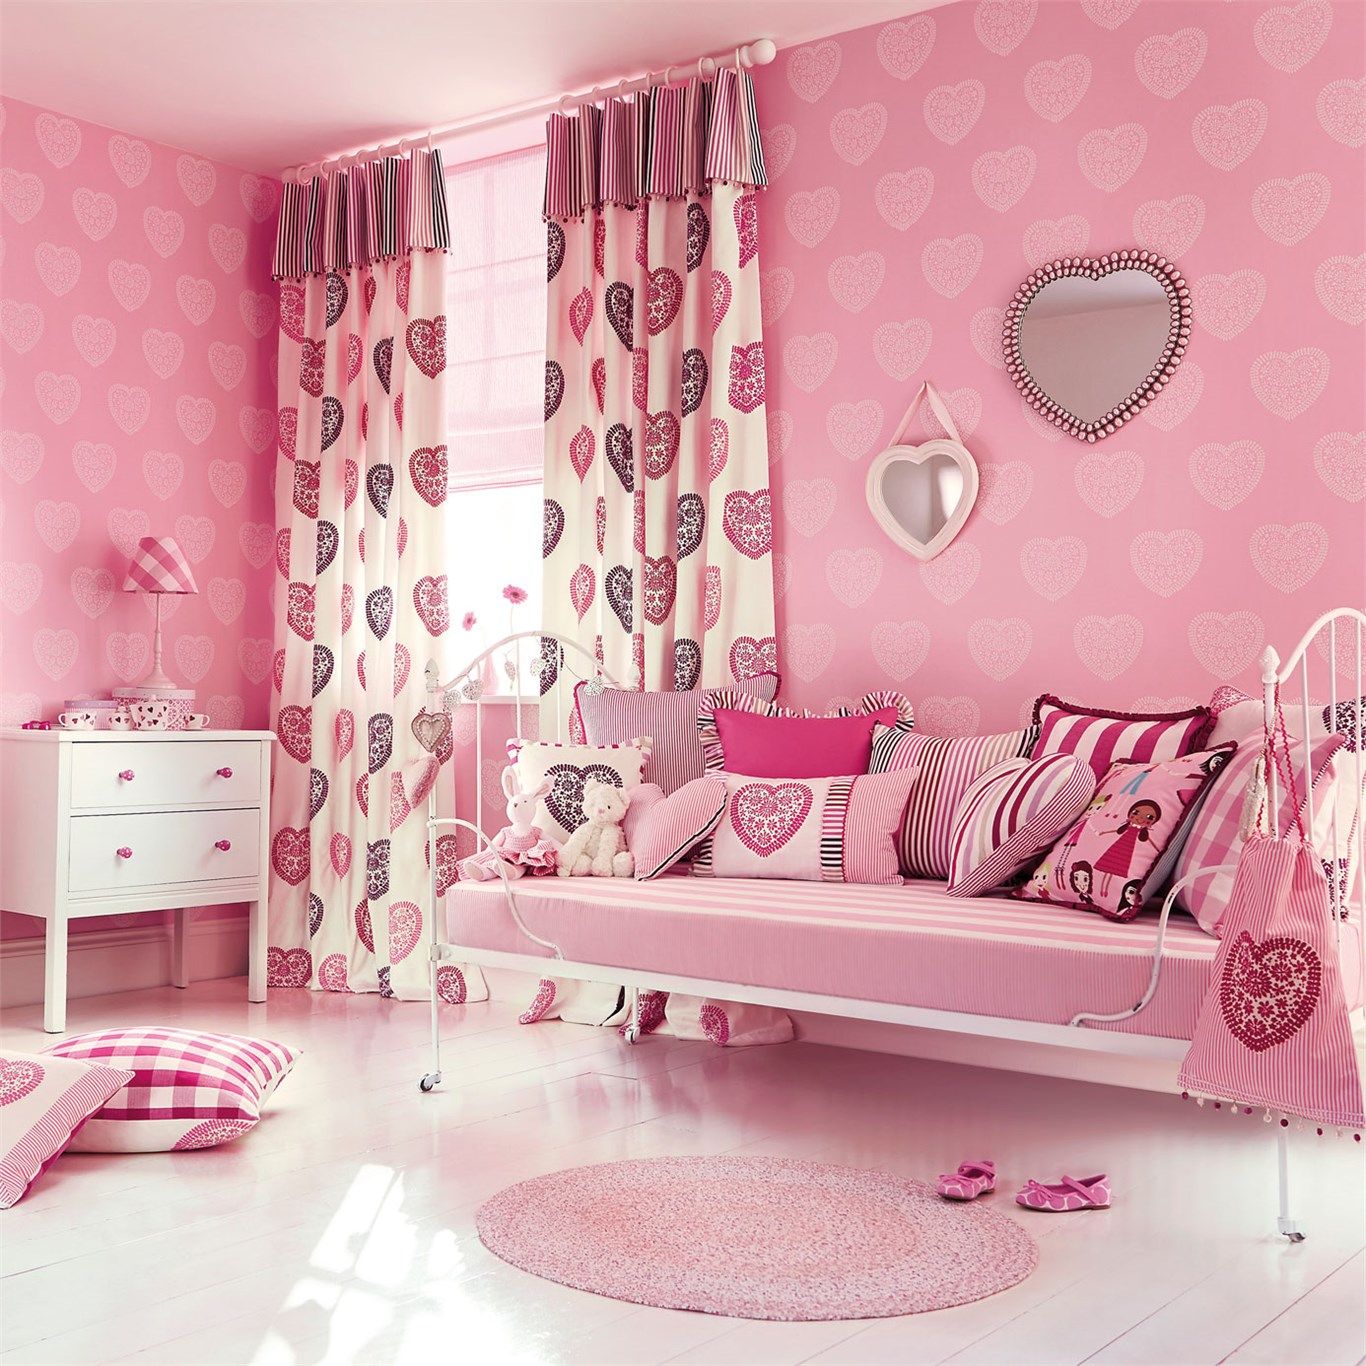 Products Harlequin - Designer Fabrics and Wallpapers Sweet